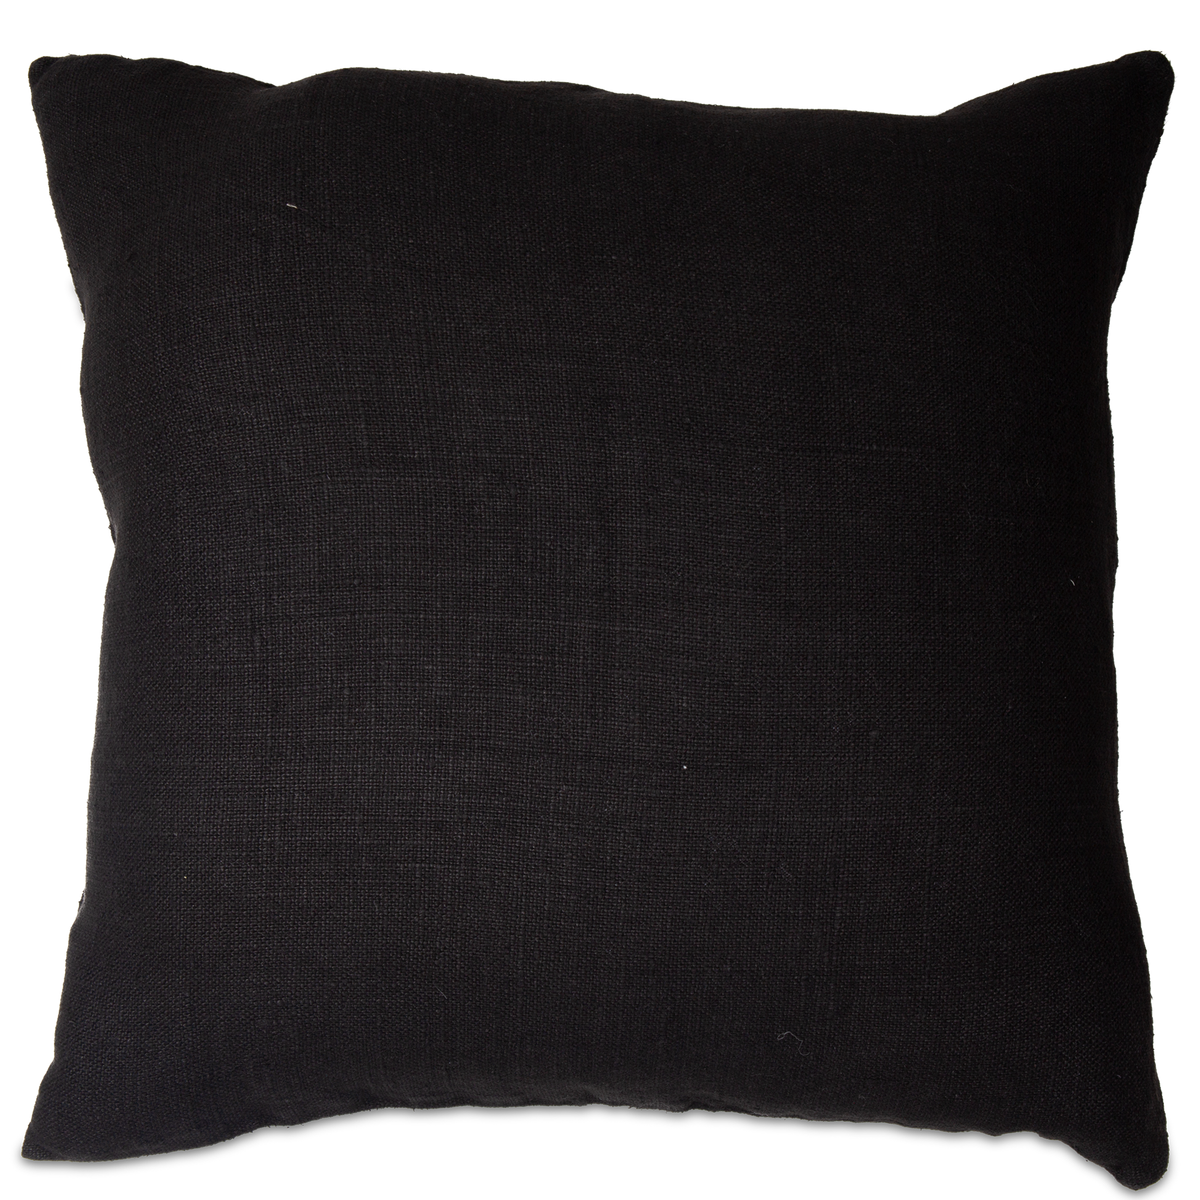 A timeless textural linen pillow in black that is perfect for adding depth to your seating or bedding collection.